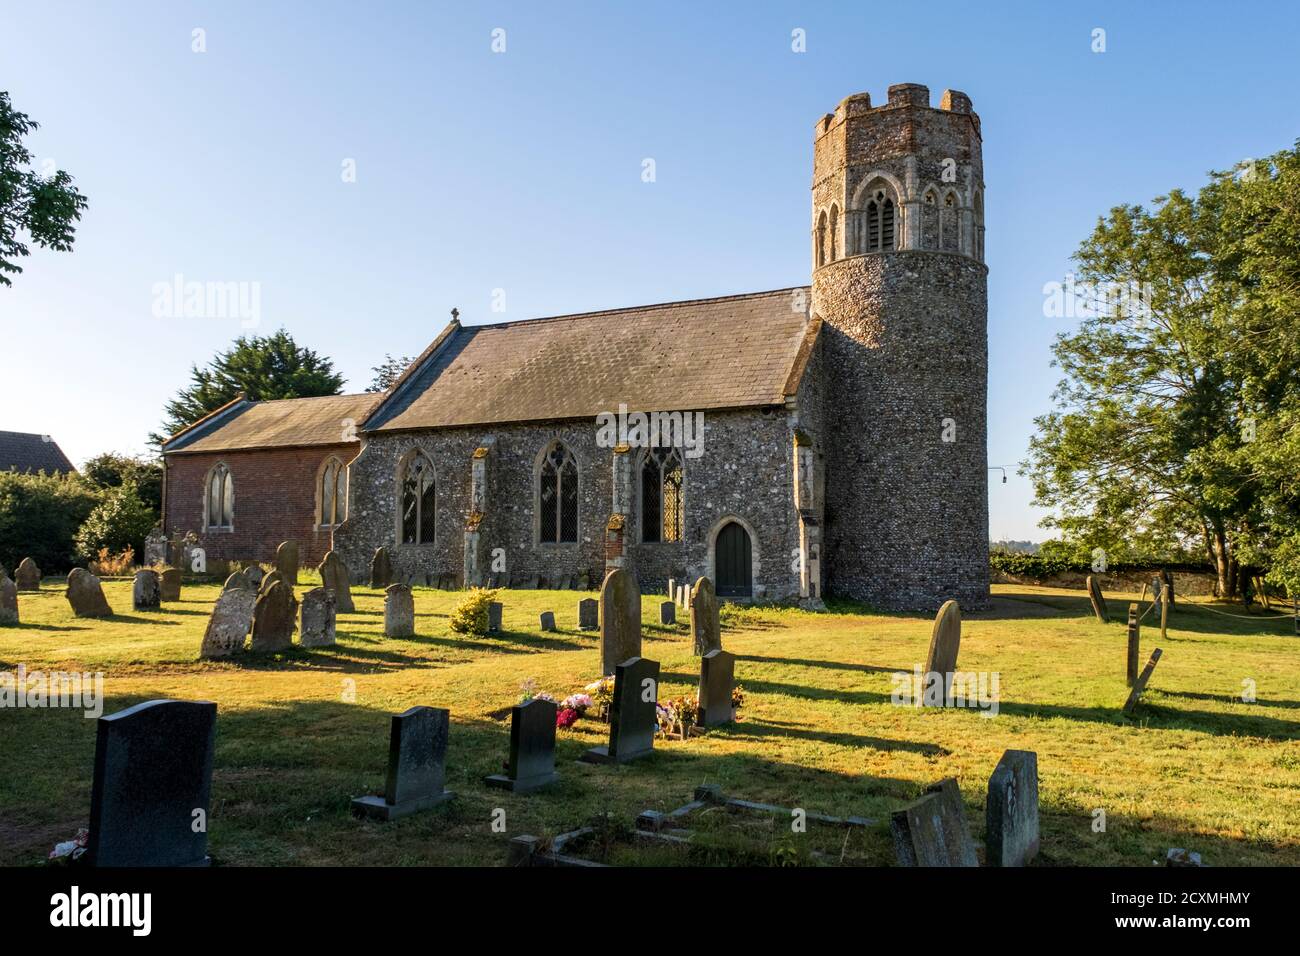 St. Peter's Church in Repps mit Bastwick in Repps, Norfolk, England Stockfoto